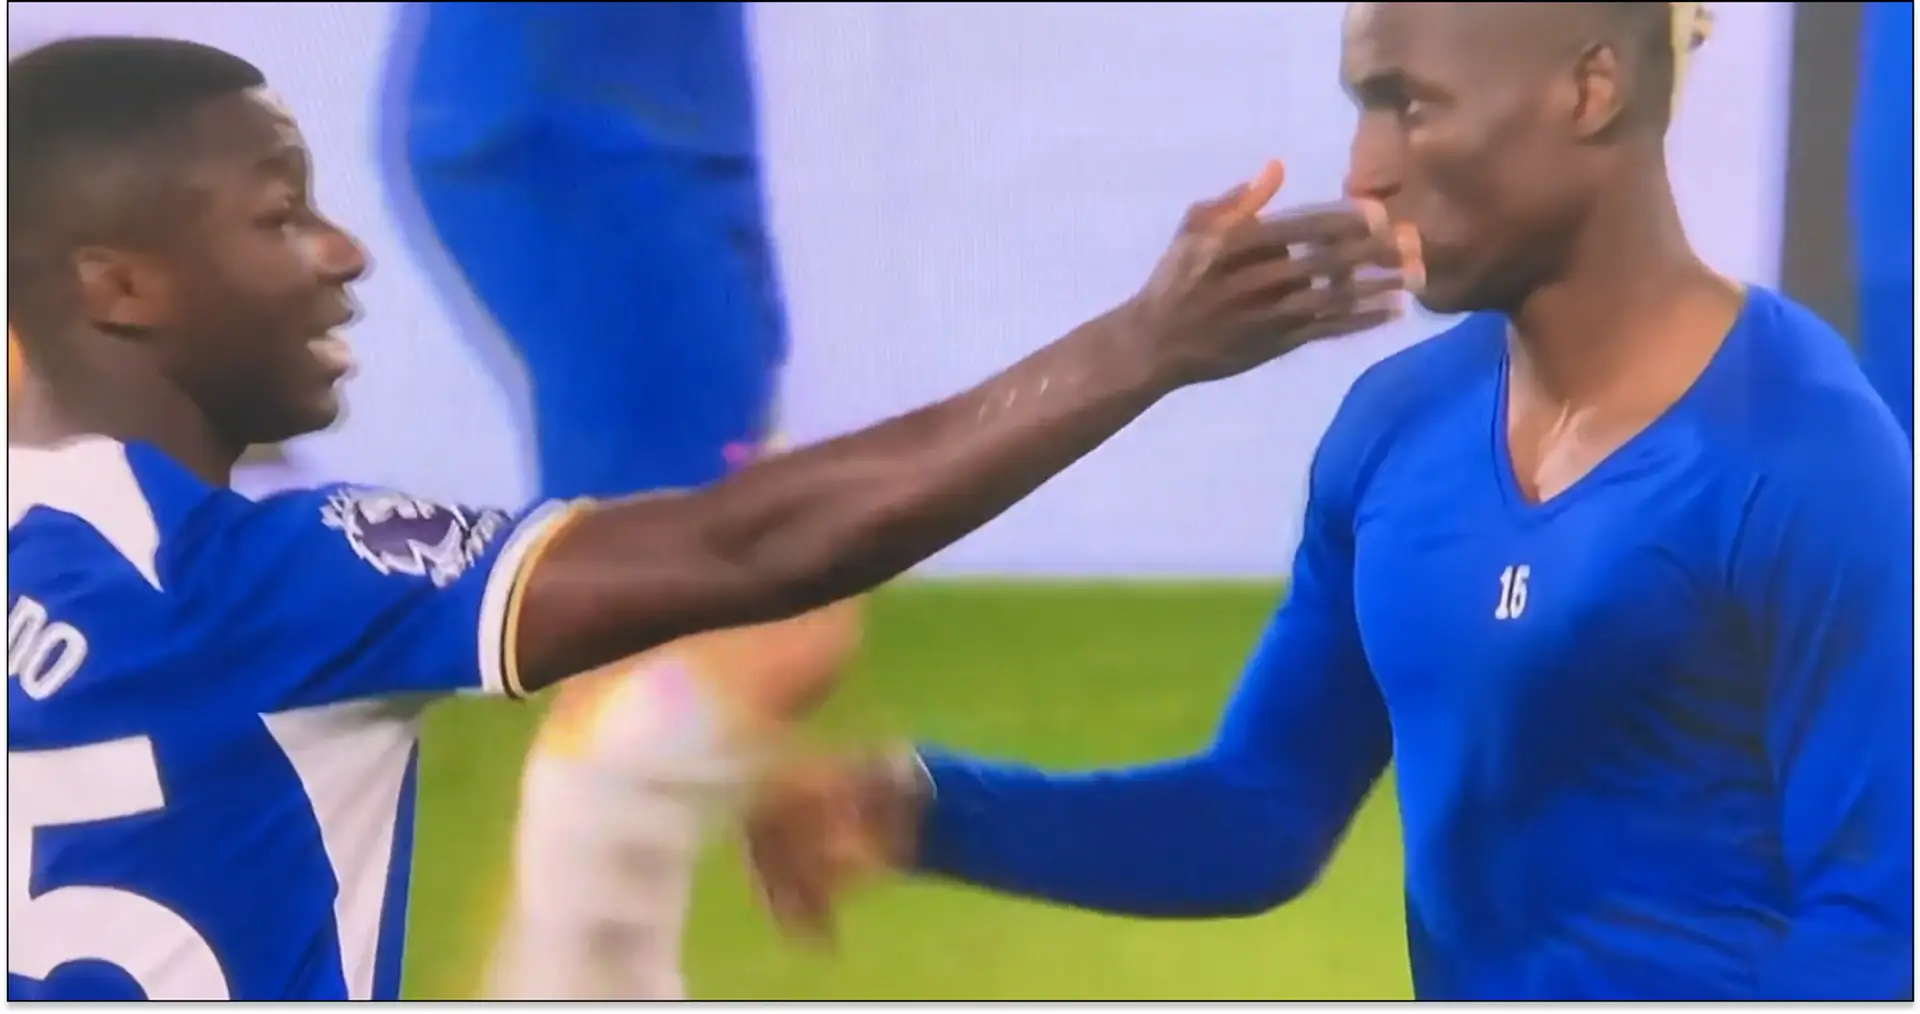 Spotted: Caicedo tells off Jackson after Palmer penalty incident